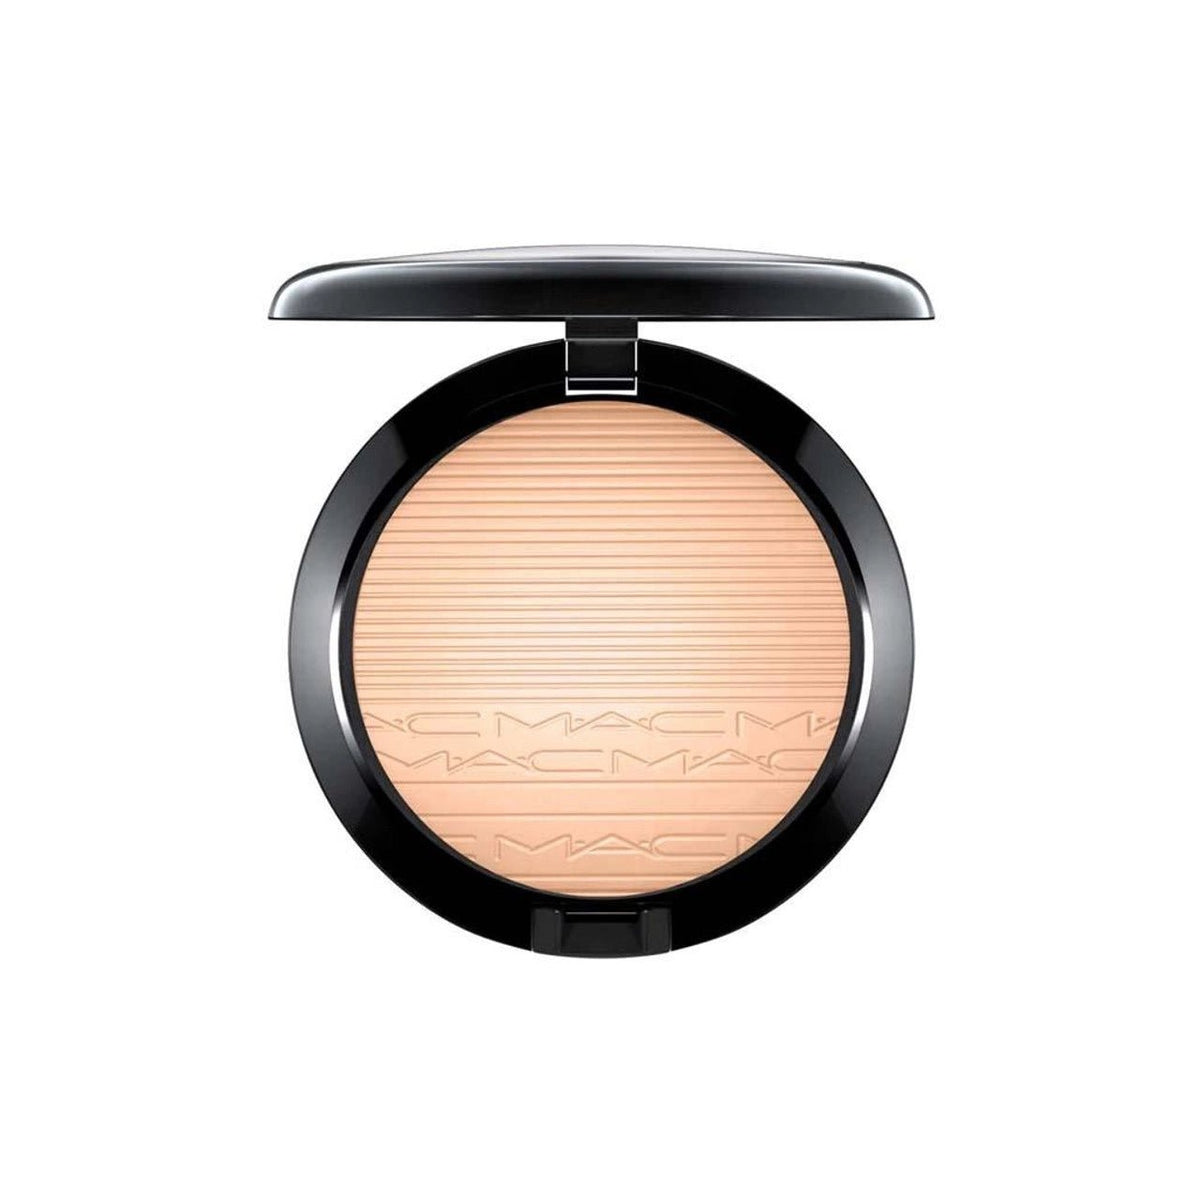 Mac Extra Dimension Skinfinish Poudre Lumiere Highlighter Double-Gleam 9G - AllurebeautypkMac Extra Dimension Skinfinish Poudre Lumiere Highlighter Double-Gleam 9G